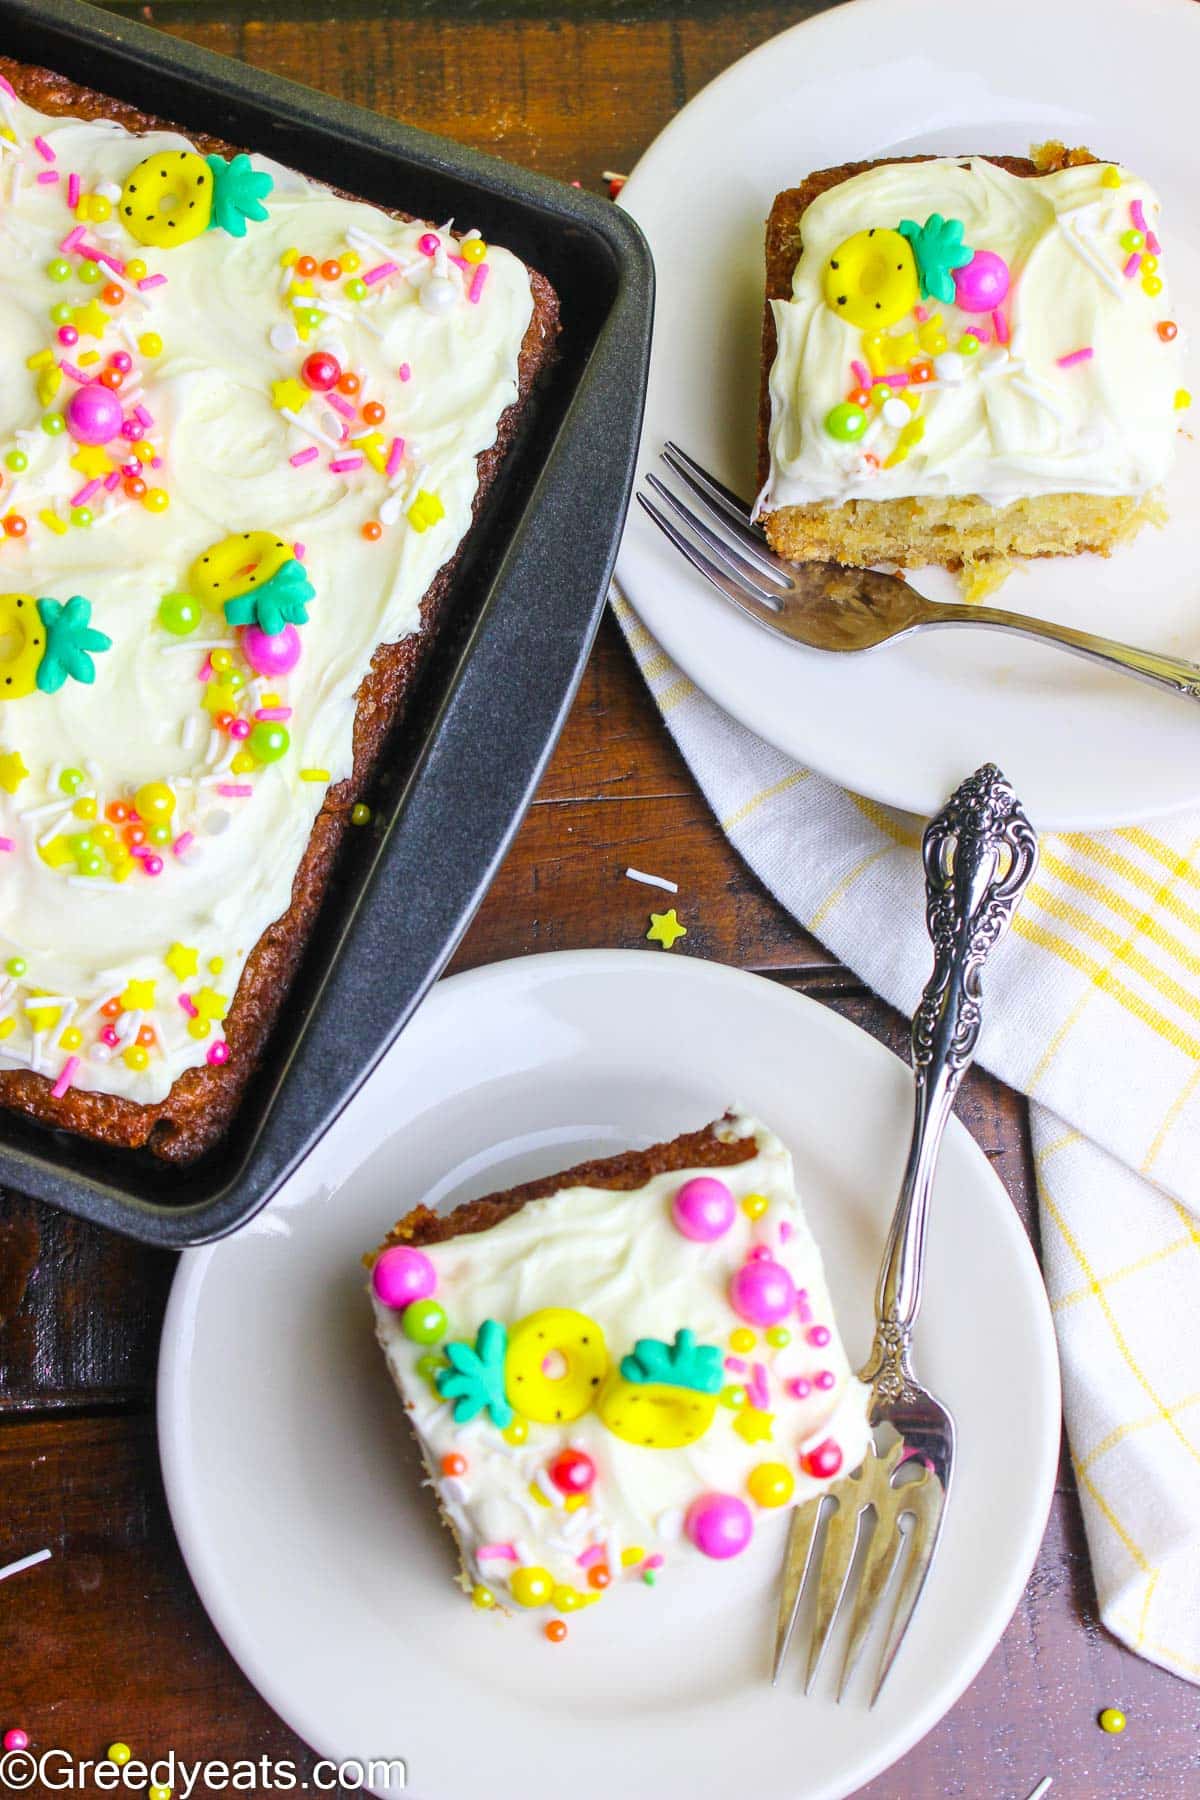 Crushed Pineapple cake with pineapple tid-bits all around, topped with easy frosting recipe and sprinkles.